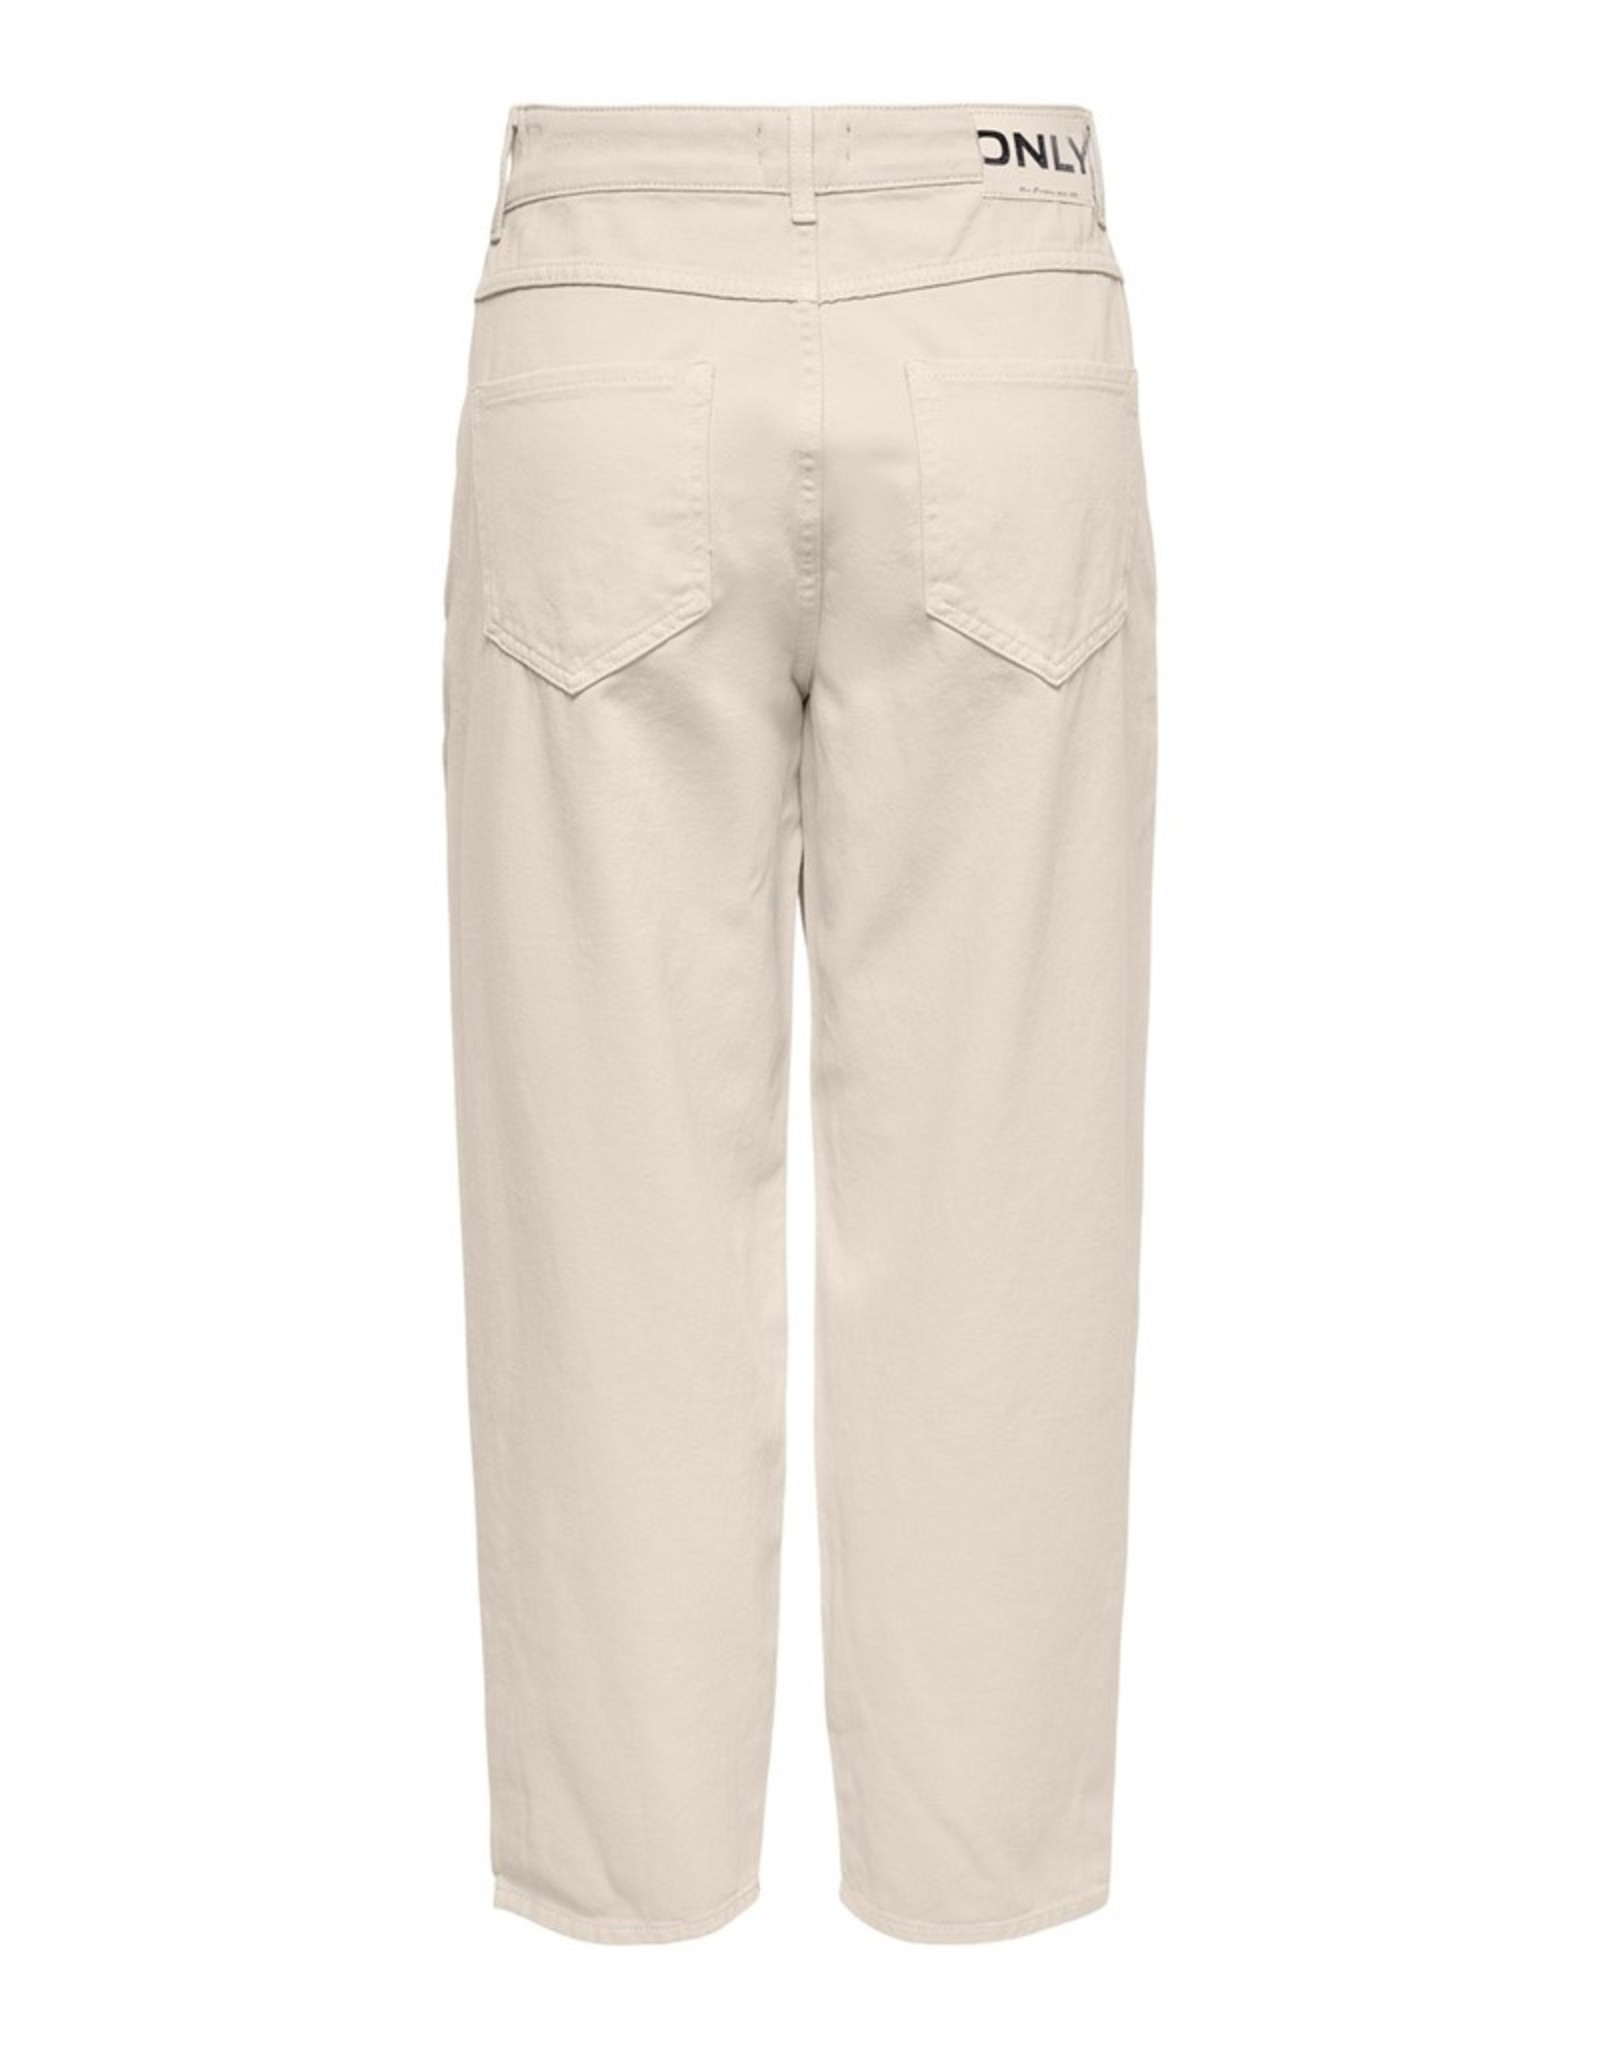 Only Verna Balloon Pant